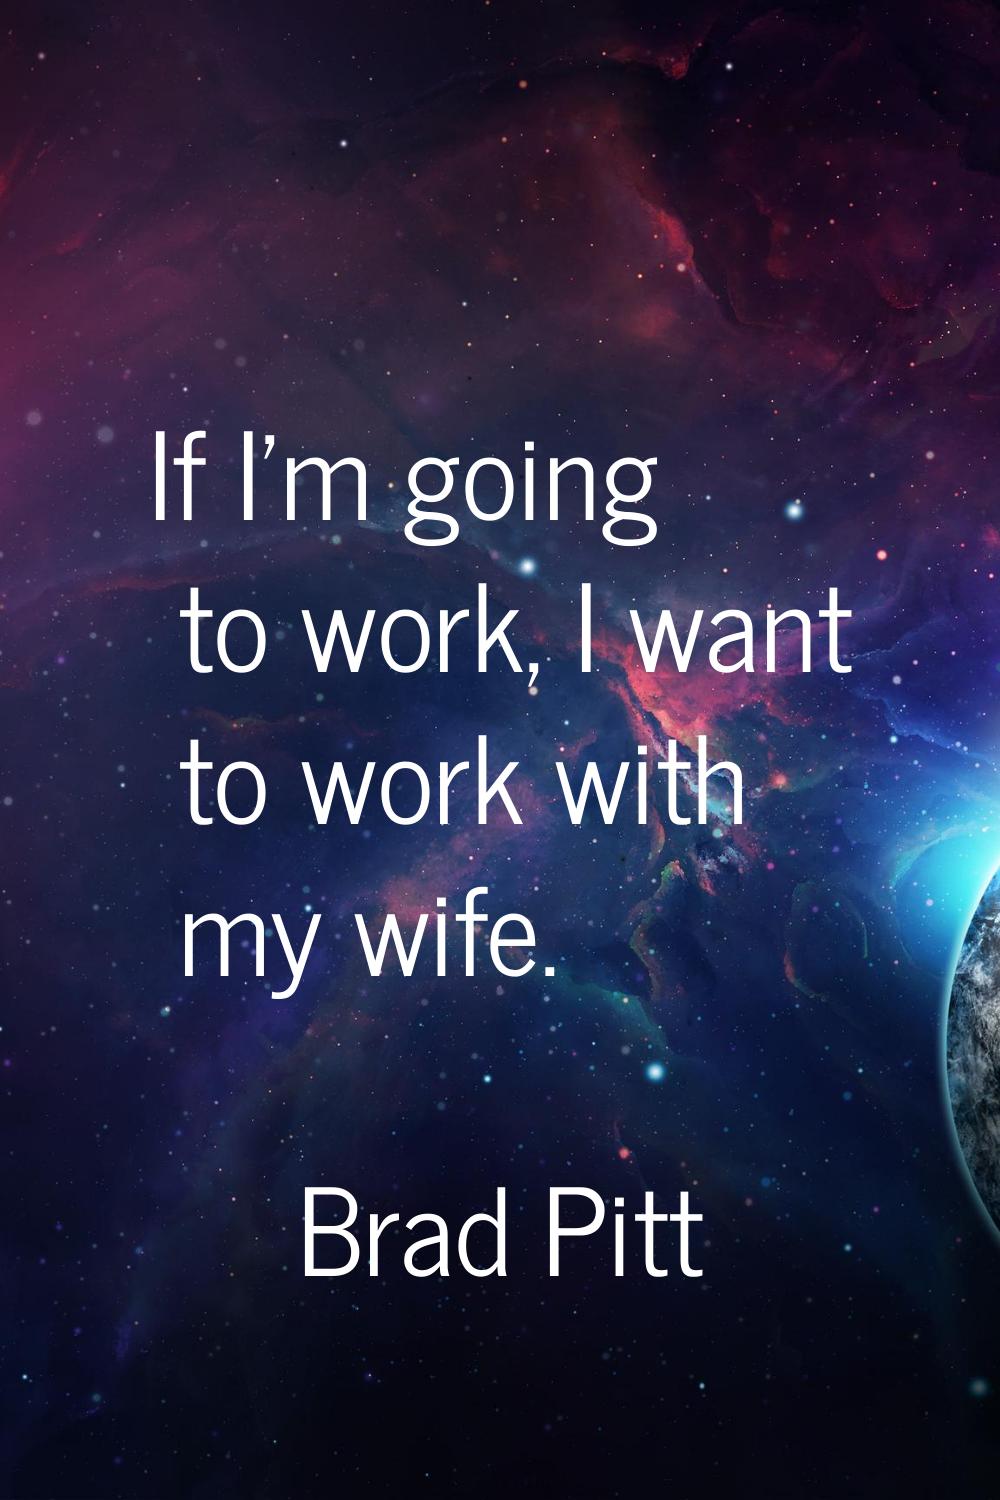 If I'm going to work, I want to work with my wife.